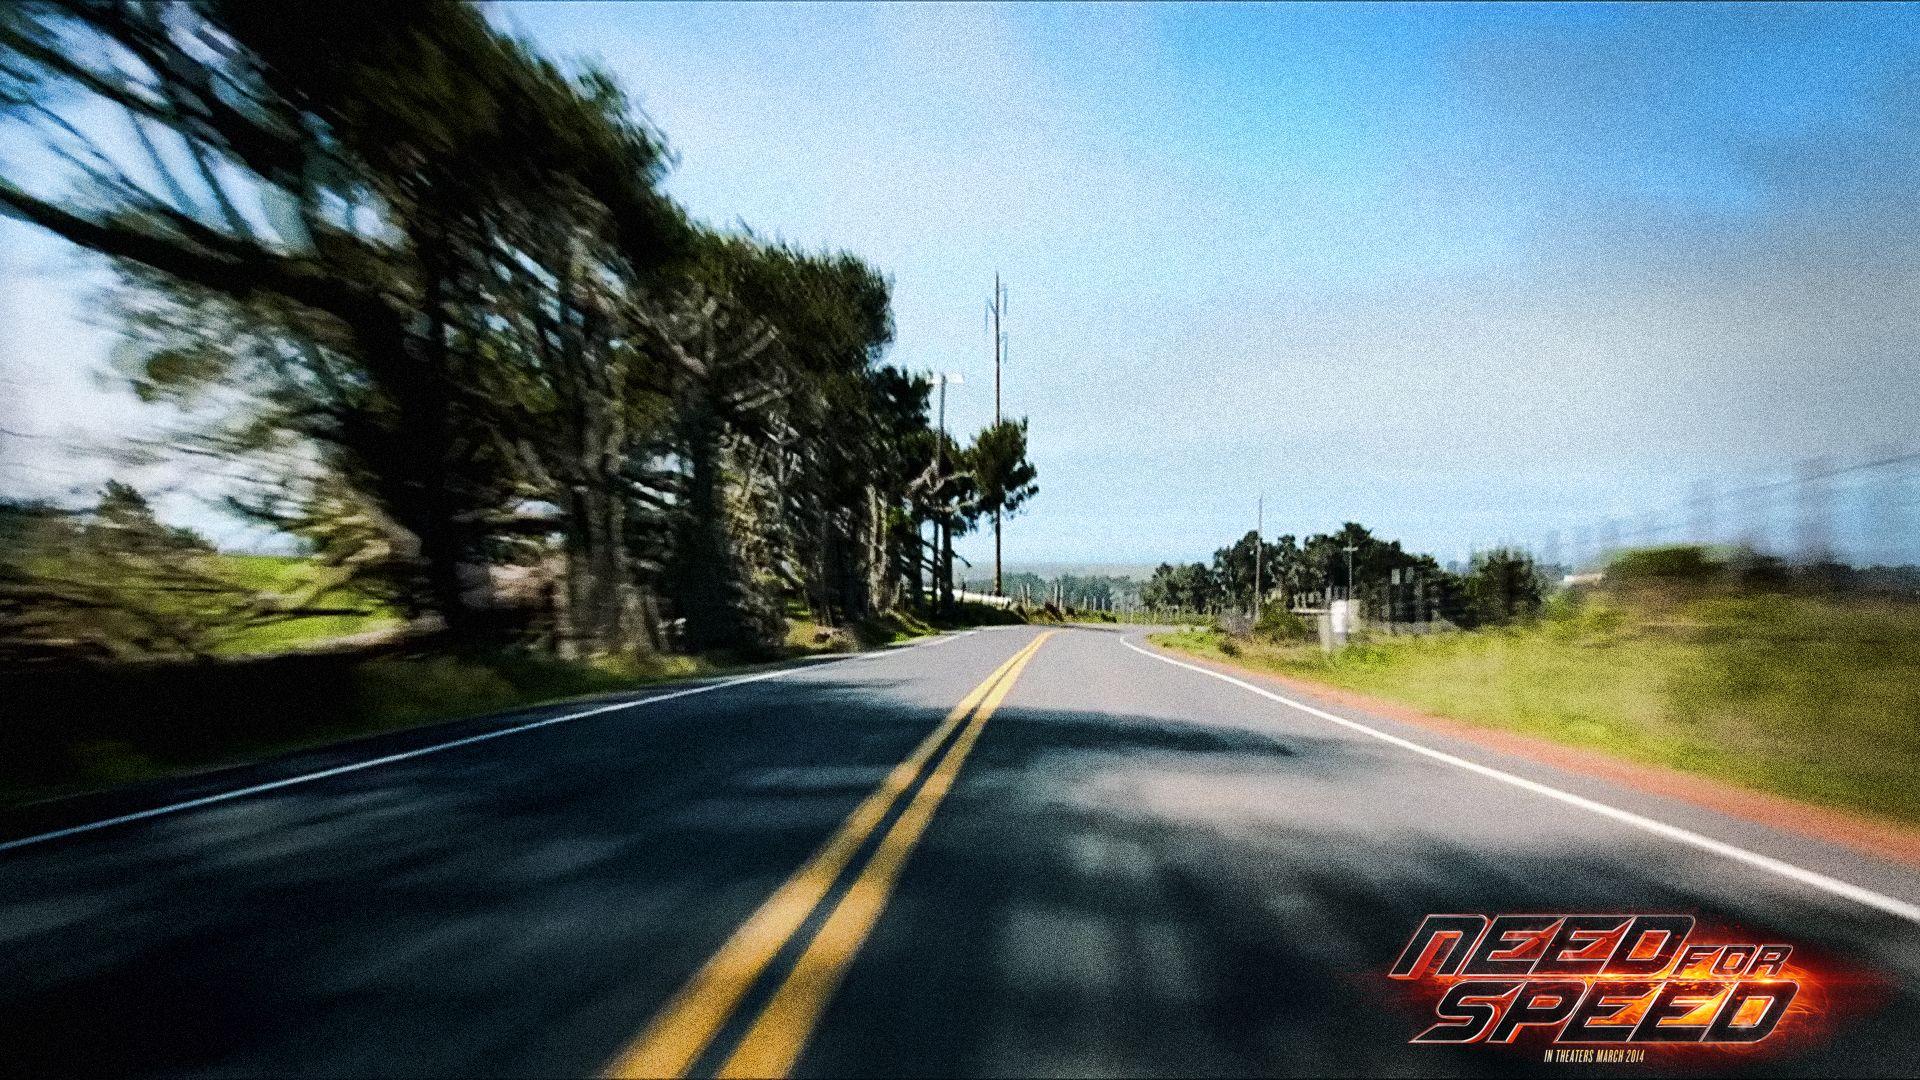 Need For Speed movie wallpaper 1920x1080 (6)